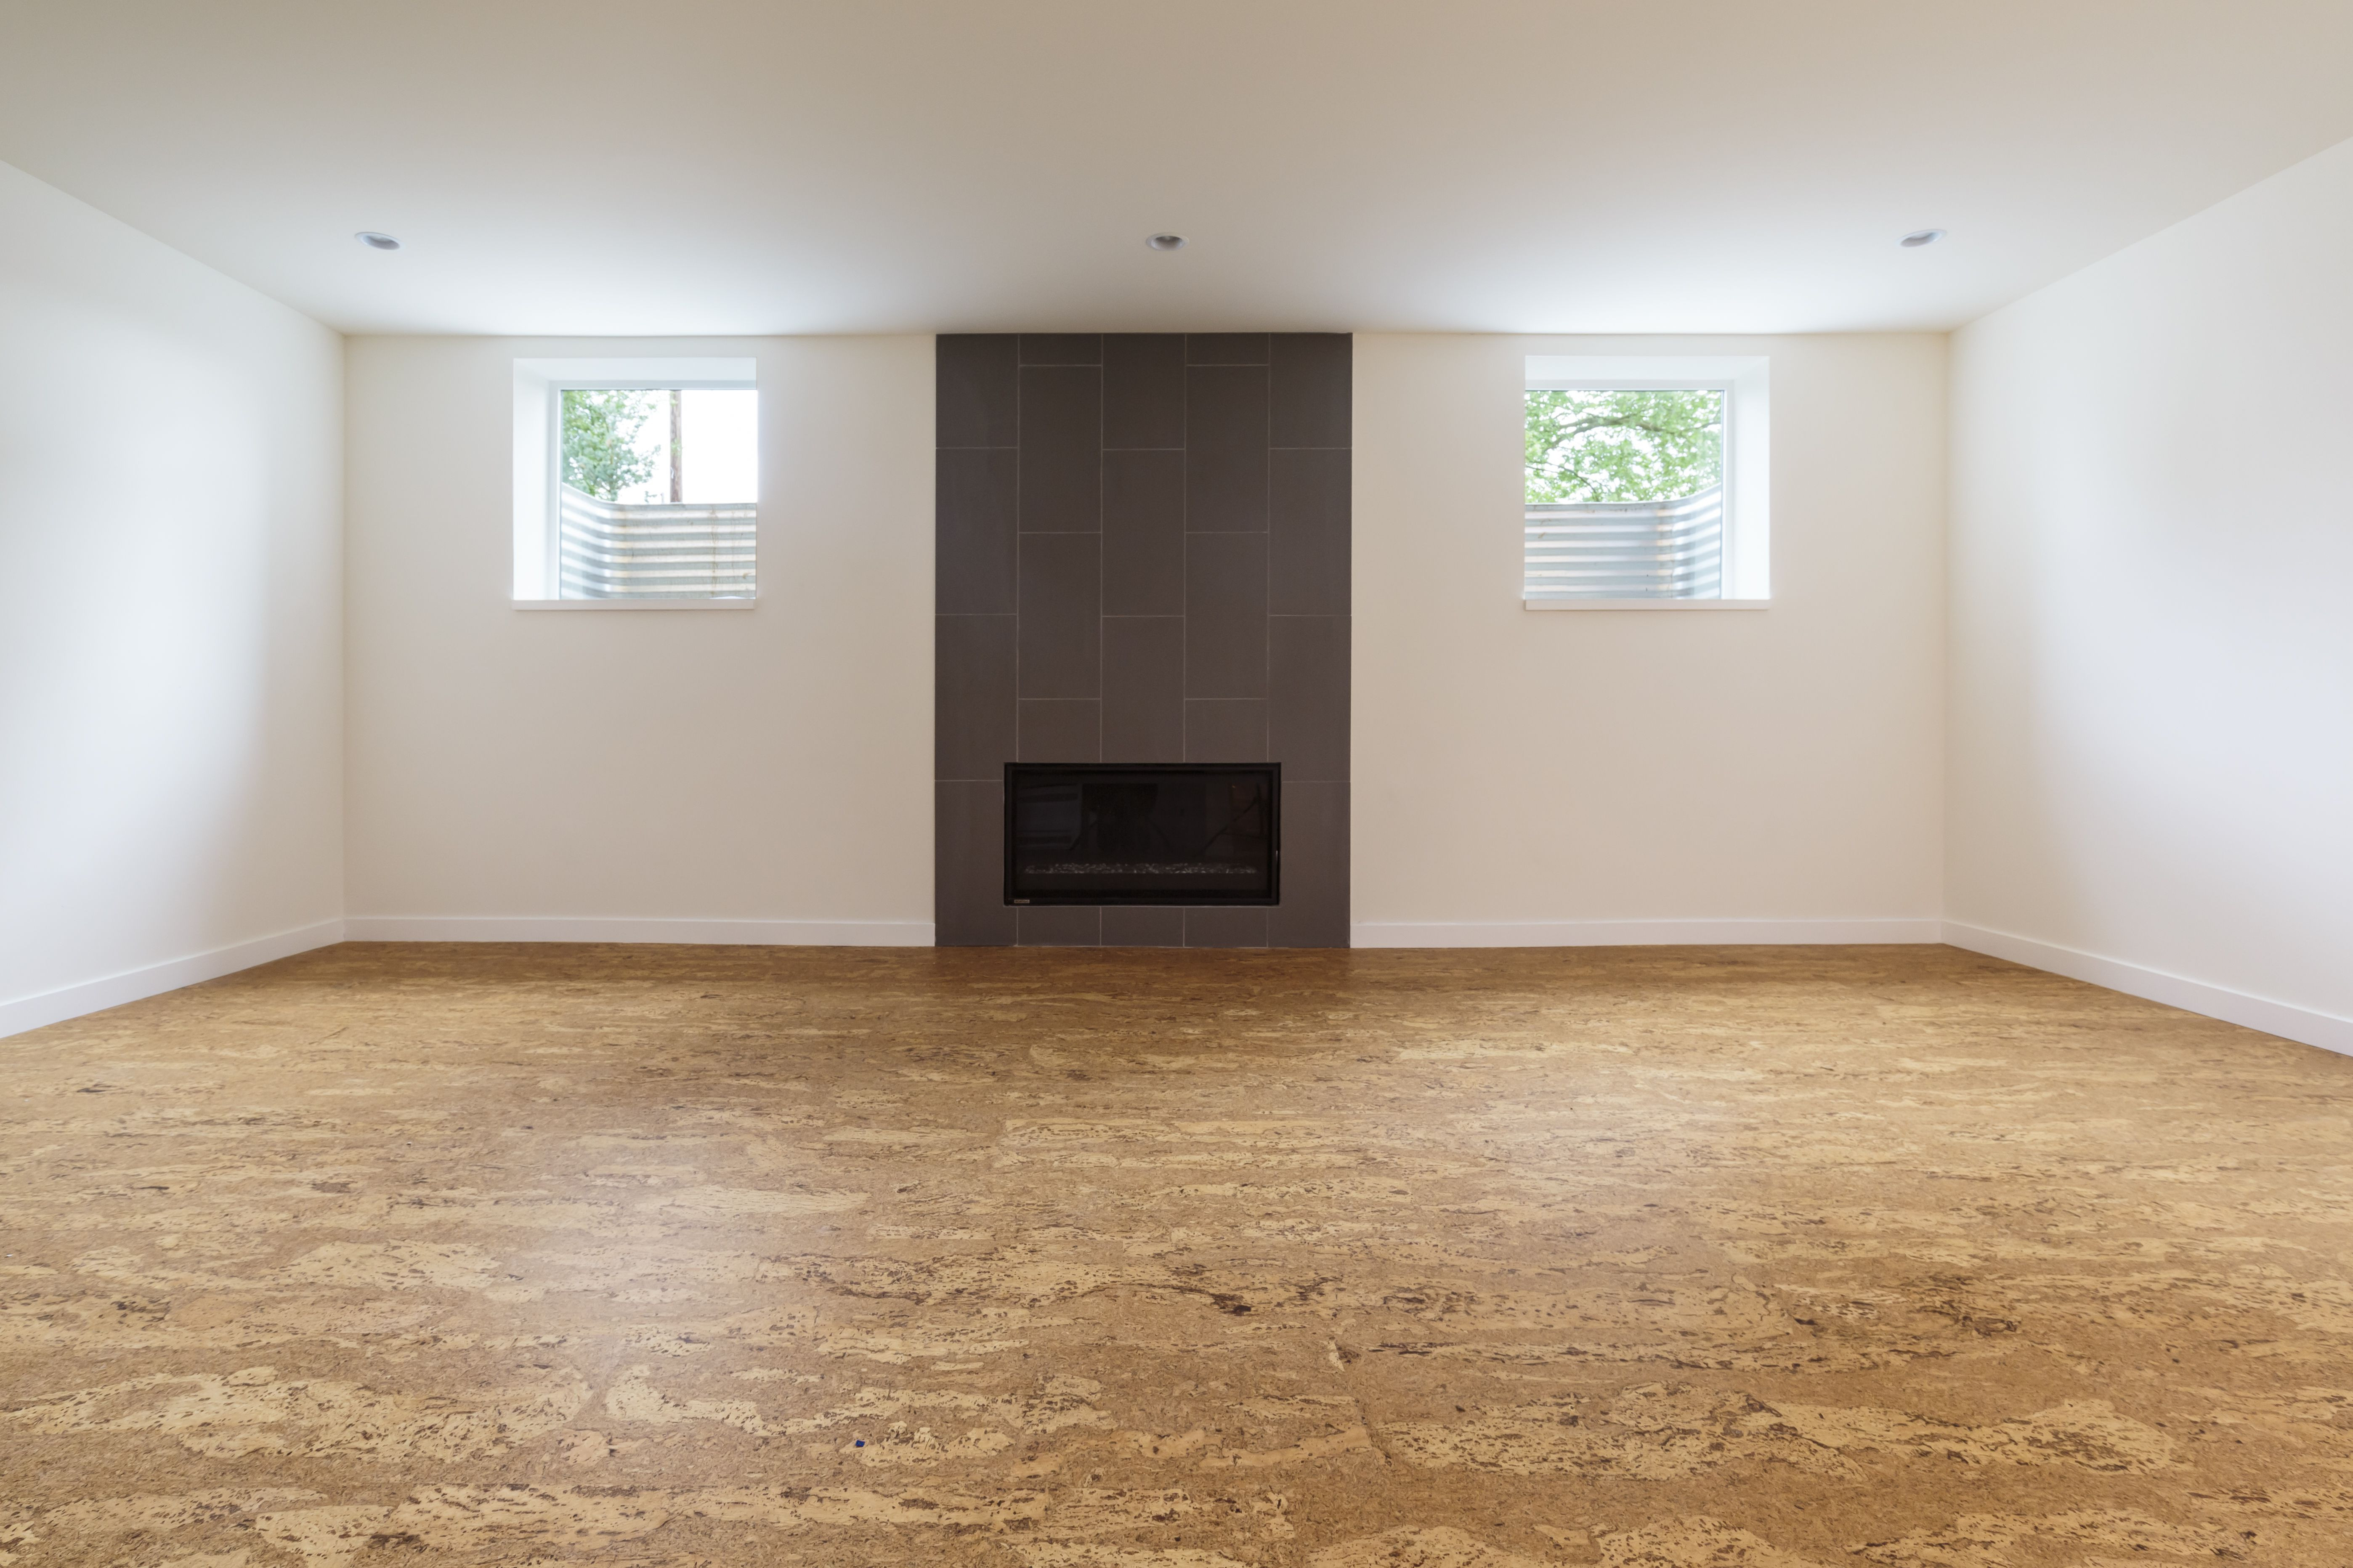 27 Unique Average Cost for Hardwood Floor Installation Per Square Foot 2024 free download average cost for hardwood floor installation per square foot of cork flooring pros cons and cost throughout cork flooring in unfurnished new home 647206431 57e7c0c95f9b586c3504ca07